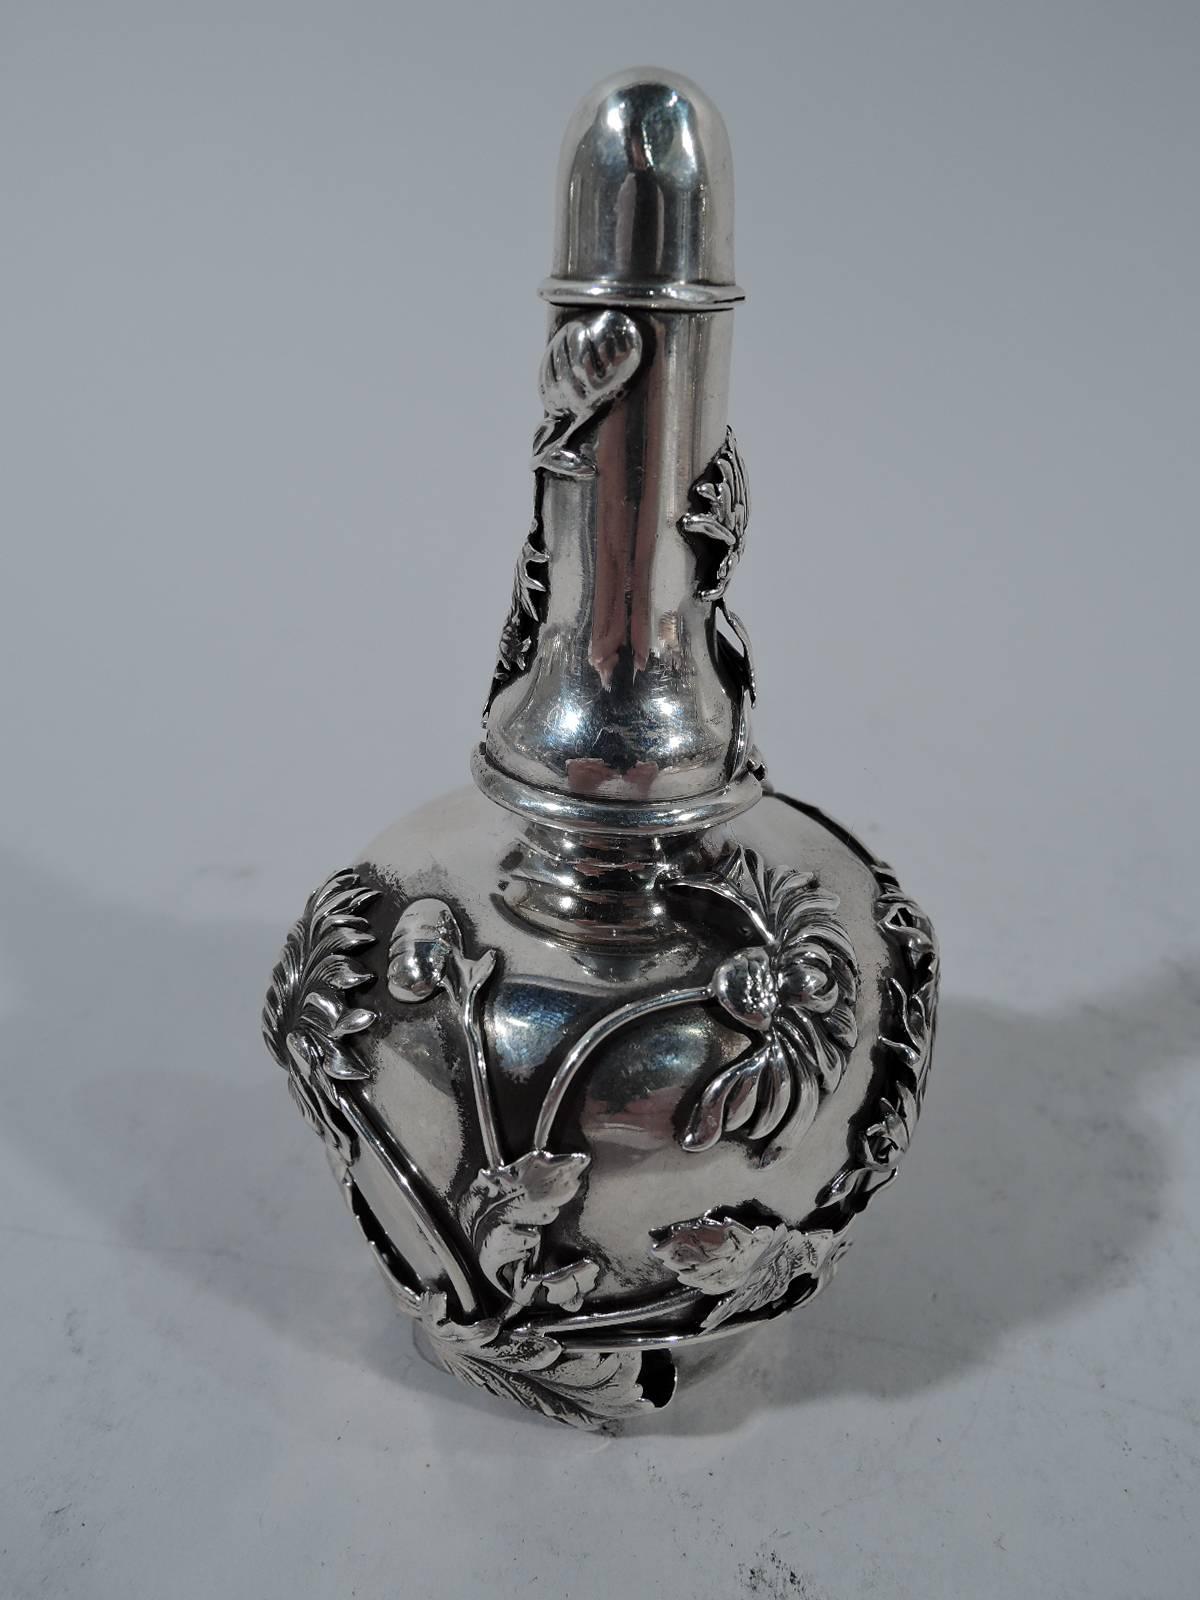 Aesthetic sterling silver scent bottle. Made by Shiebler in New York, circa 1880. Squat tapering bowl with short neck. Cover tall and conical with lift-up cap for daubing scent. Applied wrap-around chrysanthemums. Advanced design and ornament.